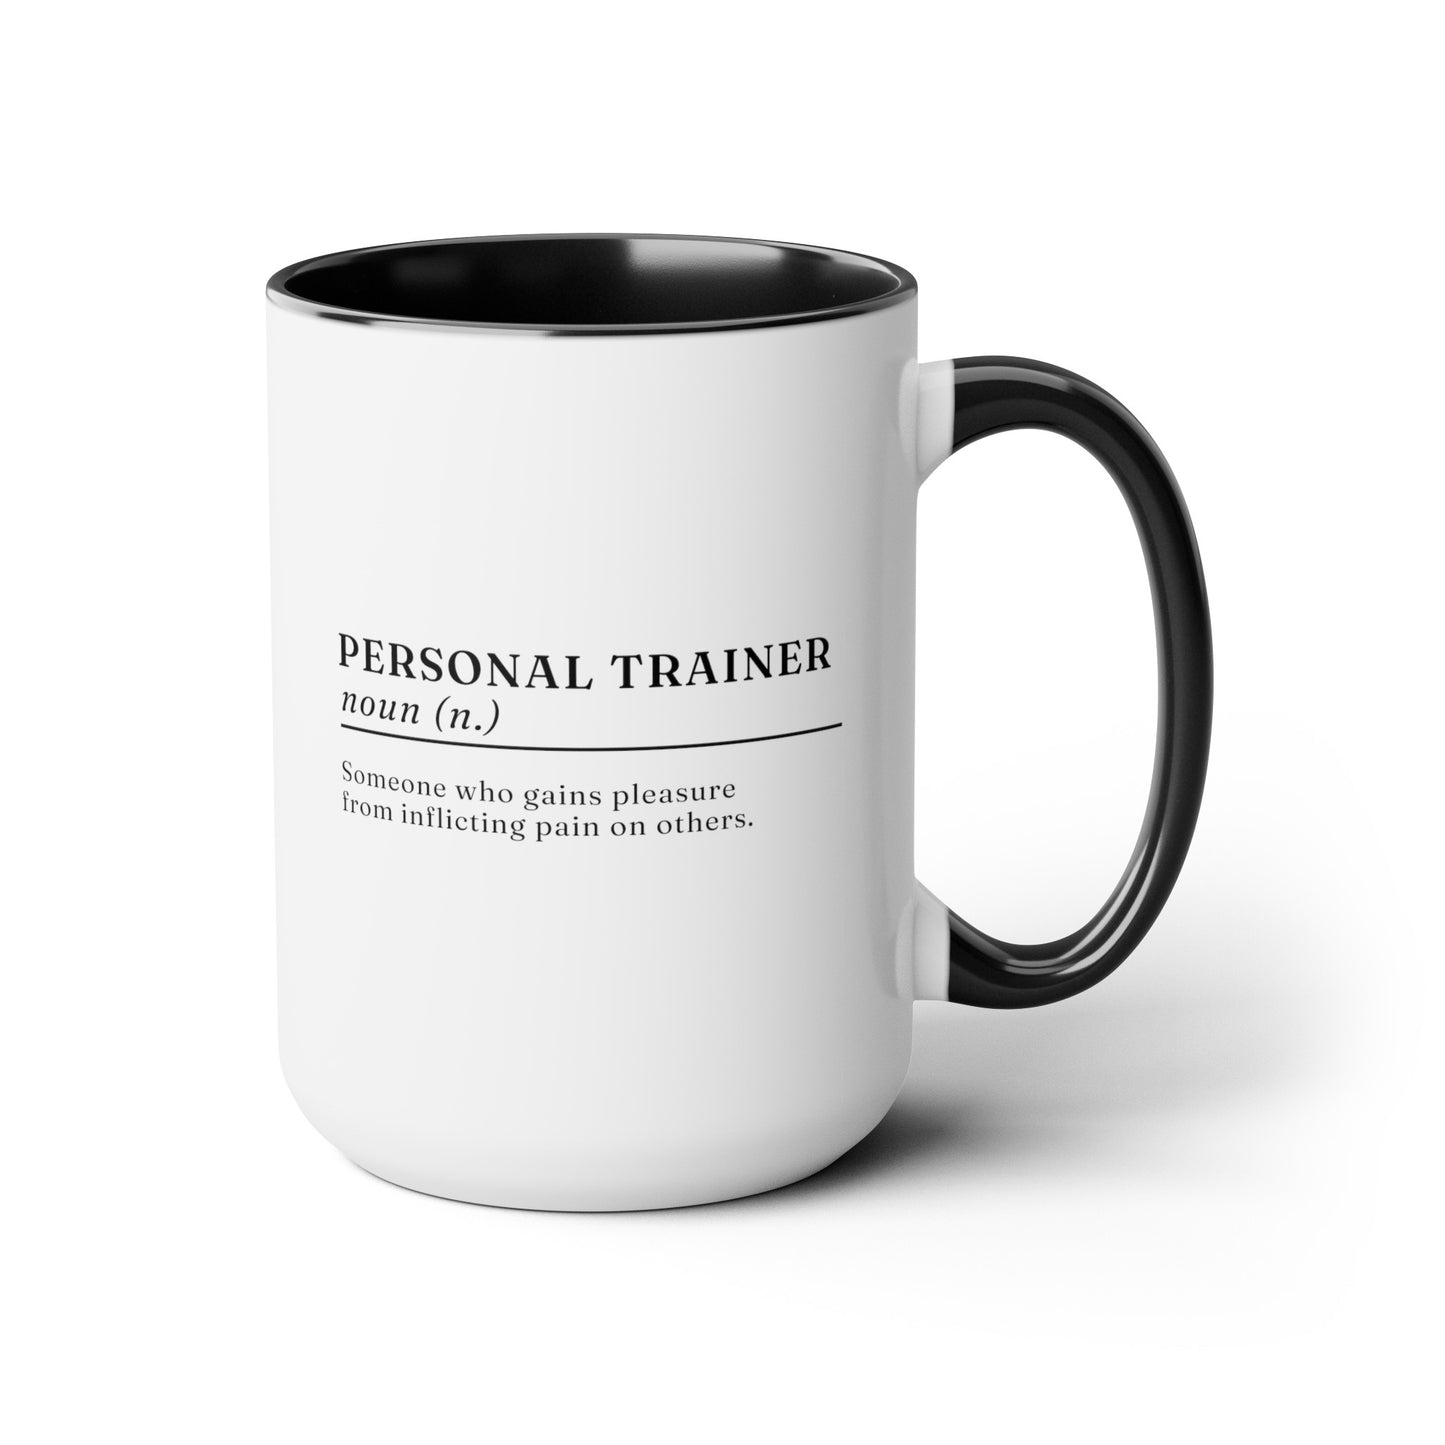 Personal Trainer Definition 15oz white with black accent funny large coffee mug gift for fitness instructor exercise workout waveywares wavey wares wavywares wavy wares